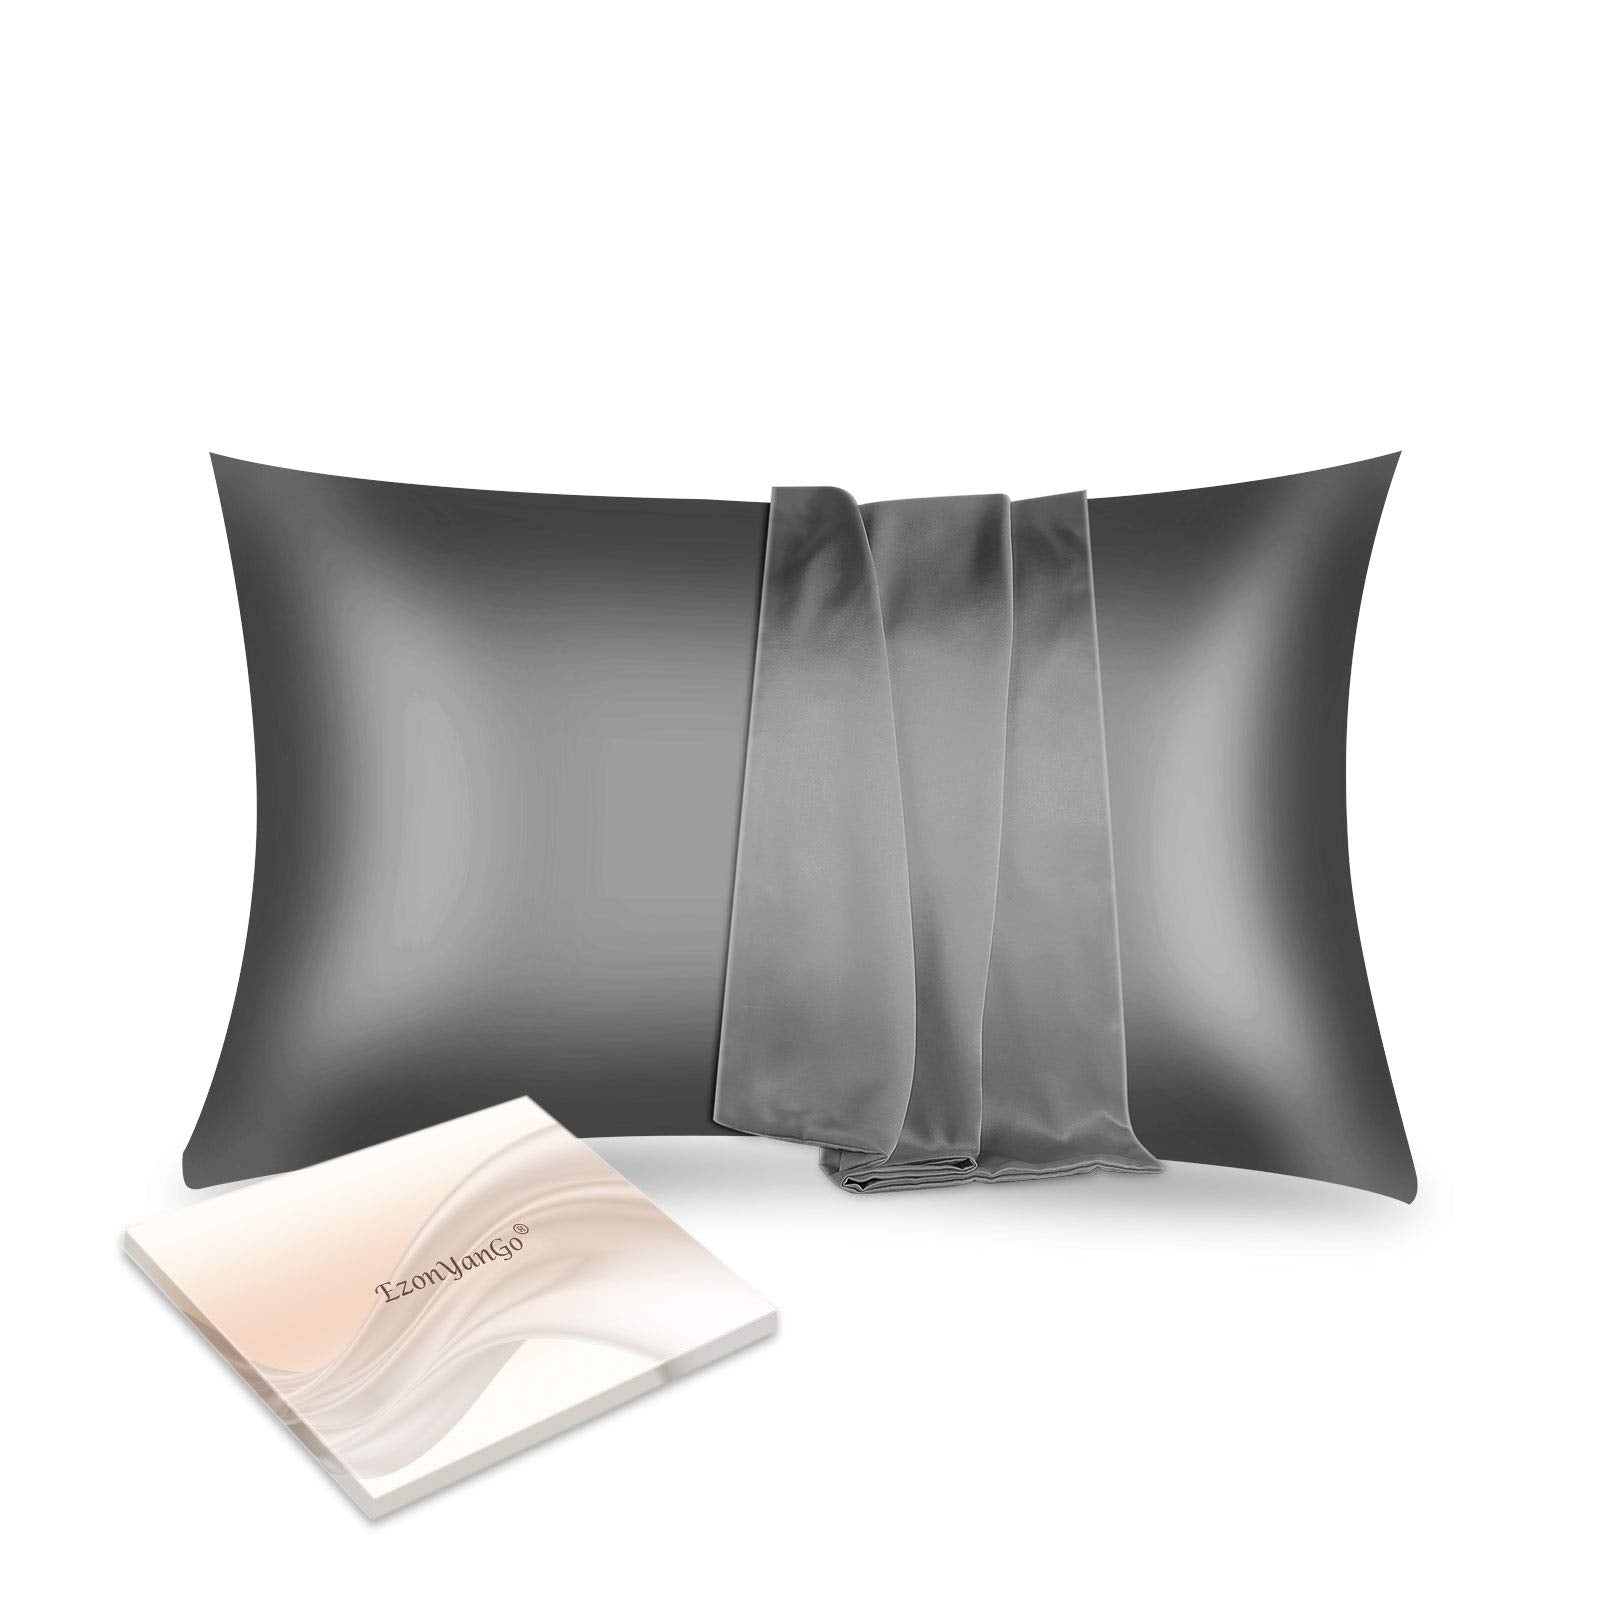 EzonYanGo 100% Mulberry Silk Pillowcase for Hair and Skin Health, Hypoallergenic, 19 Momme Silk Pillow Cases with Breathable, Not Silp and Hidden Zipper (Standard Size 20"X26", Dark Grey)